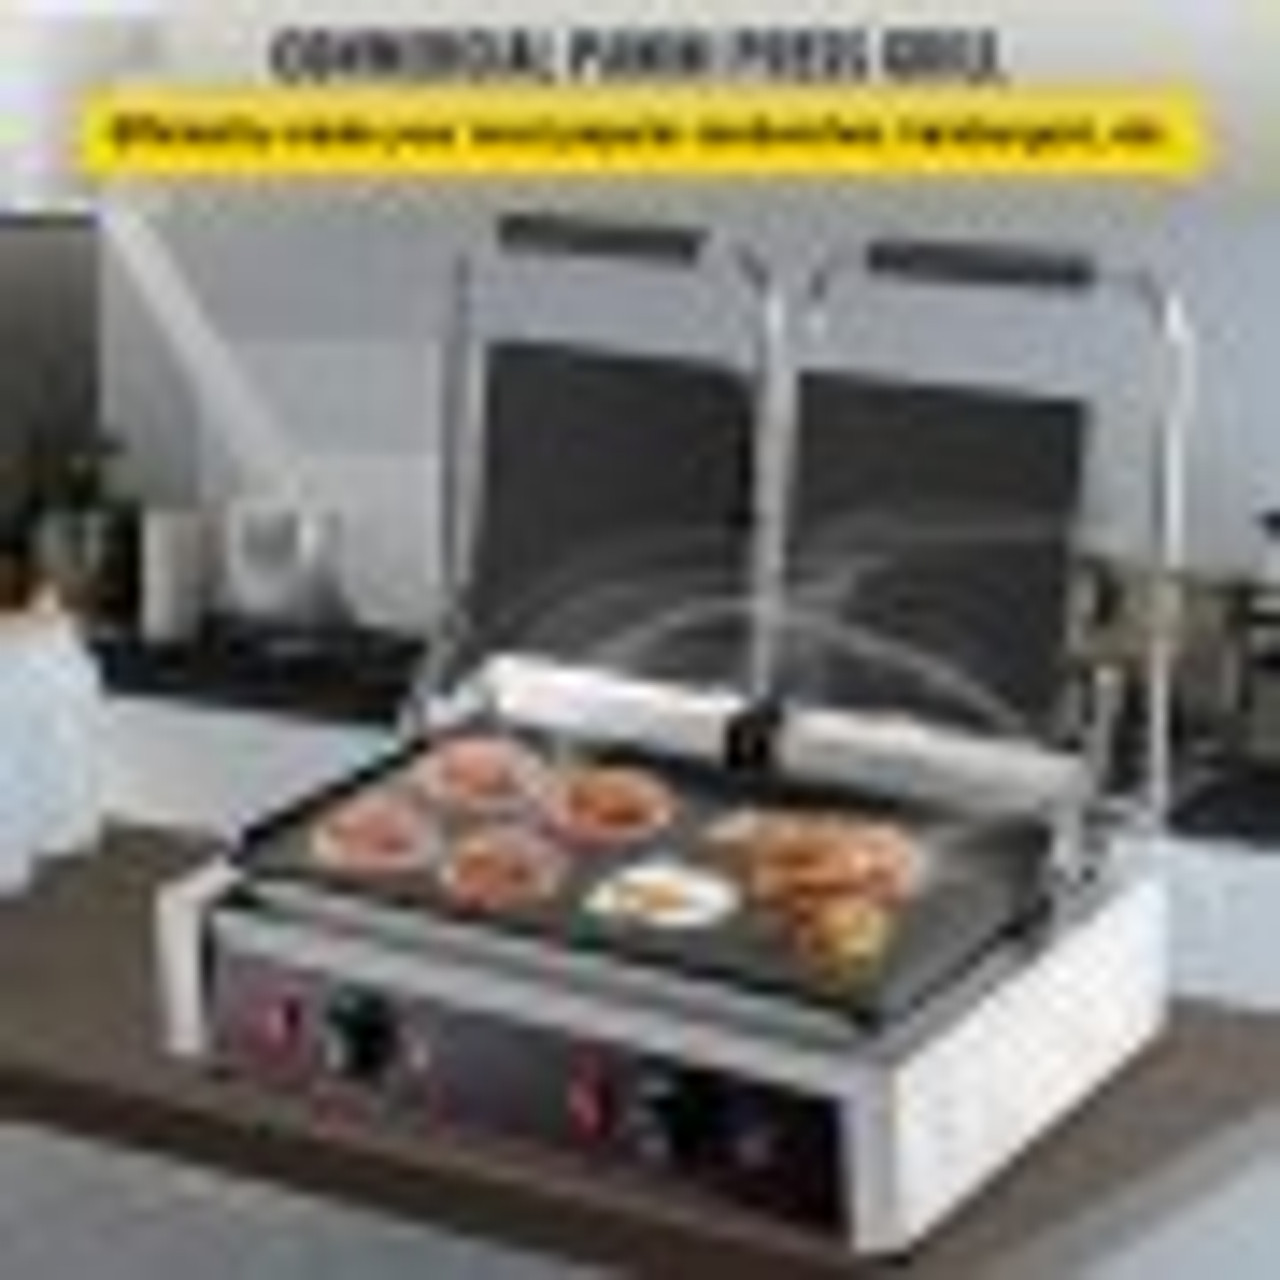 Commercial Sandwich Panini Press Grill, 2X1800W Double Flat Plates Electric Stainless Steel Sandwich Maker, Temperature Control 122øF-572øF Non Stick Surface for Hamburgers Steaks Bacons.